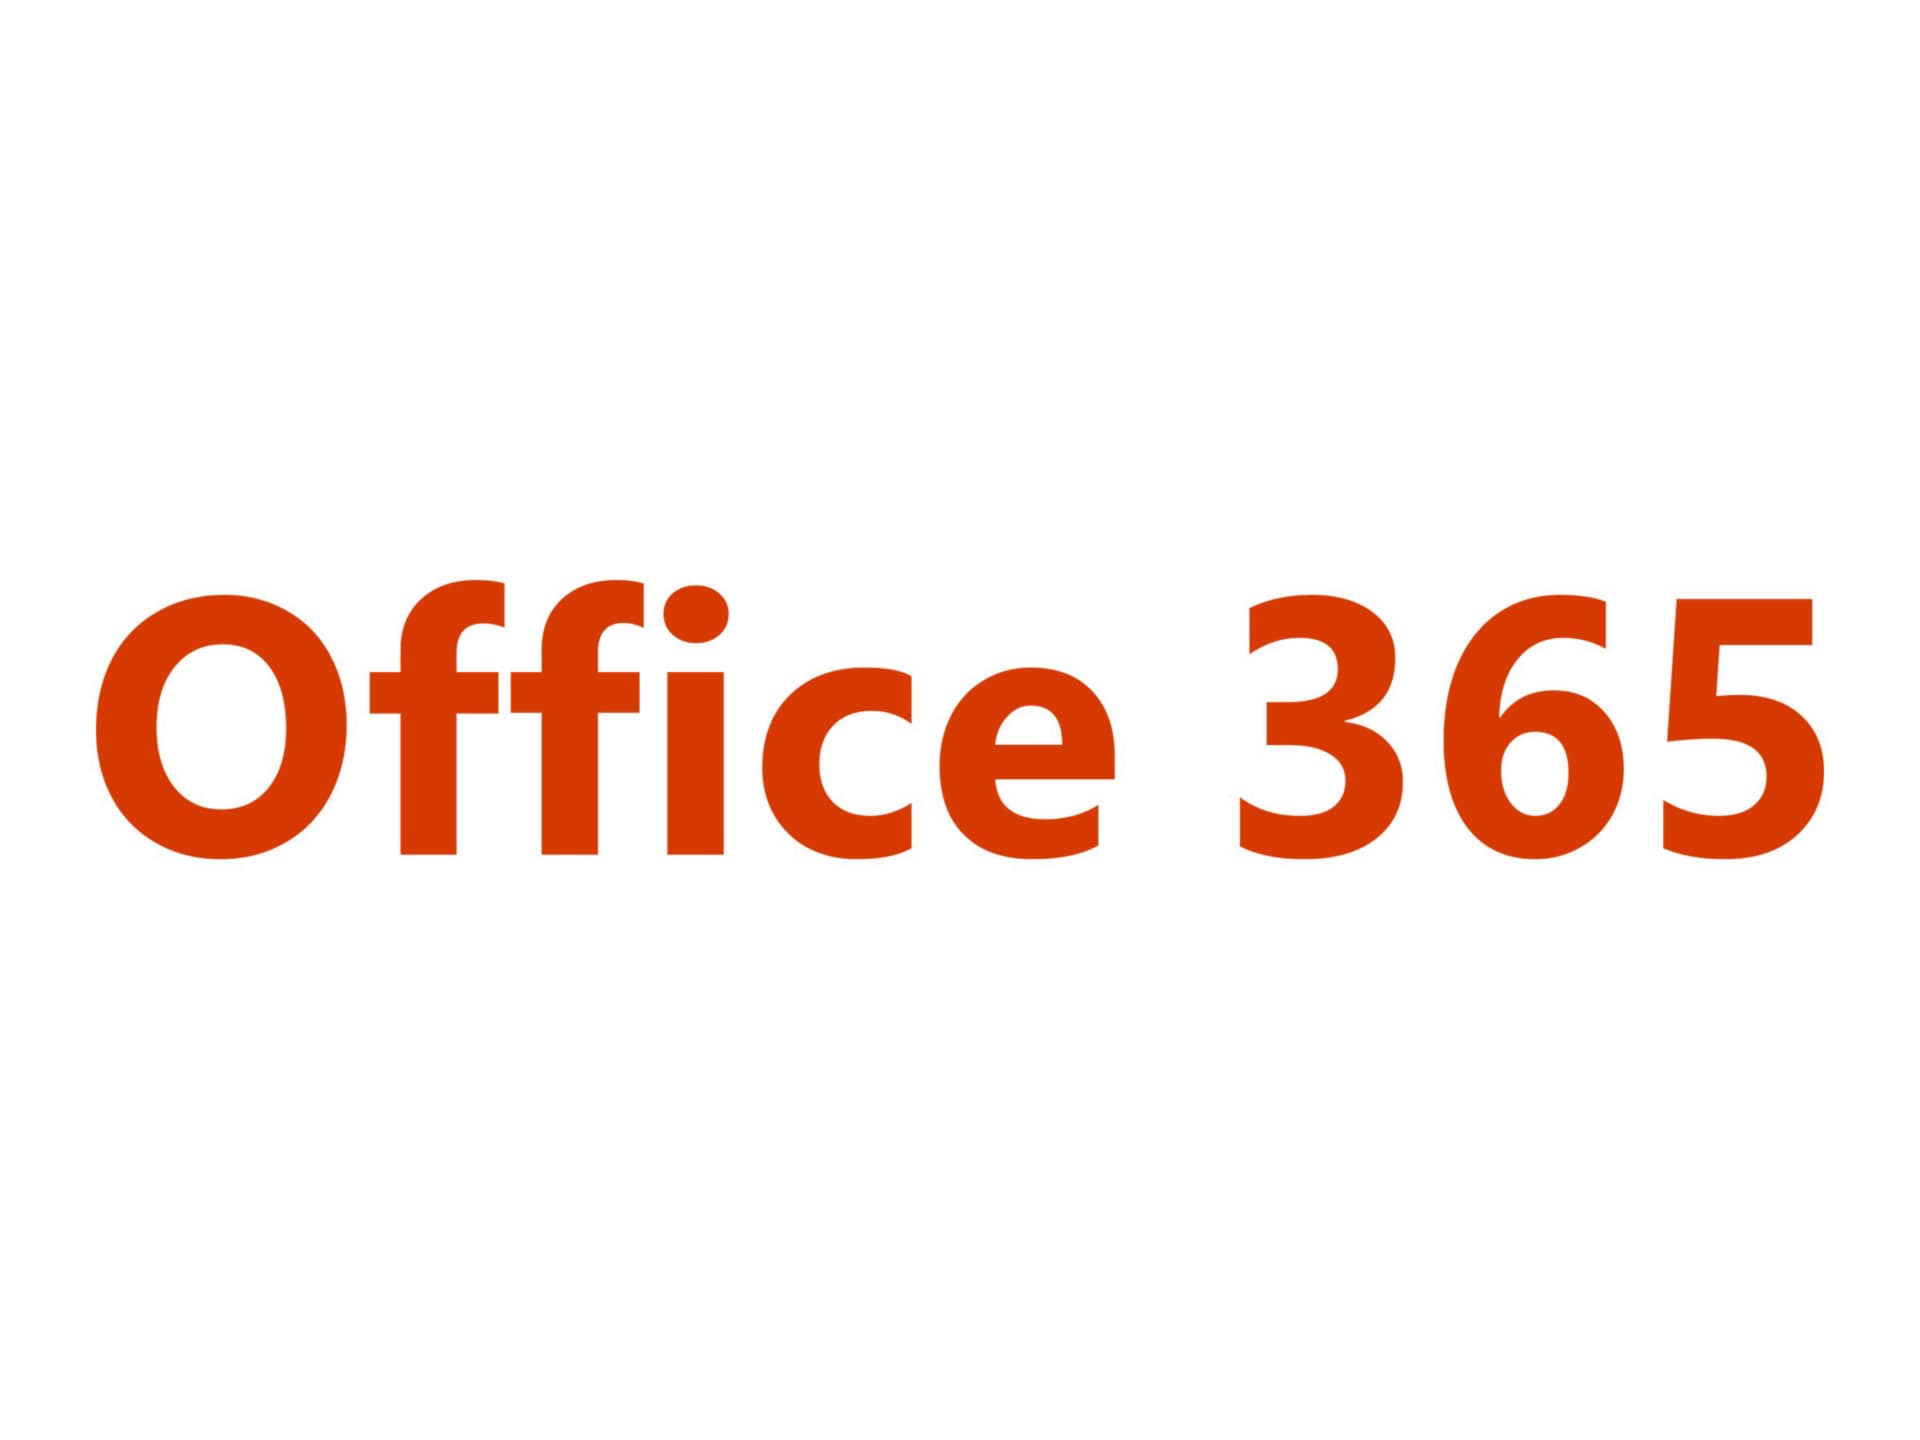 Microsoft Office 365 Advanced Threat Protection Plan 2 - step-up subscripti